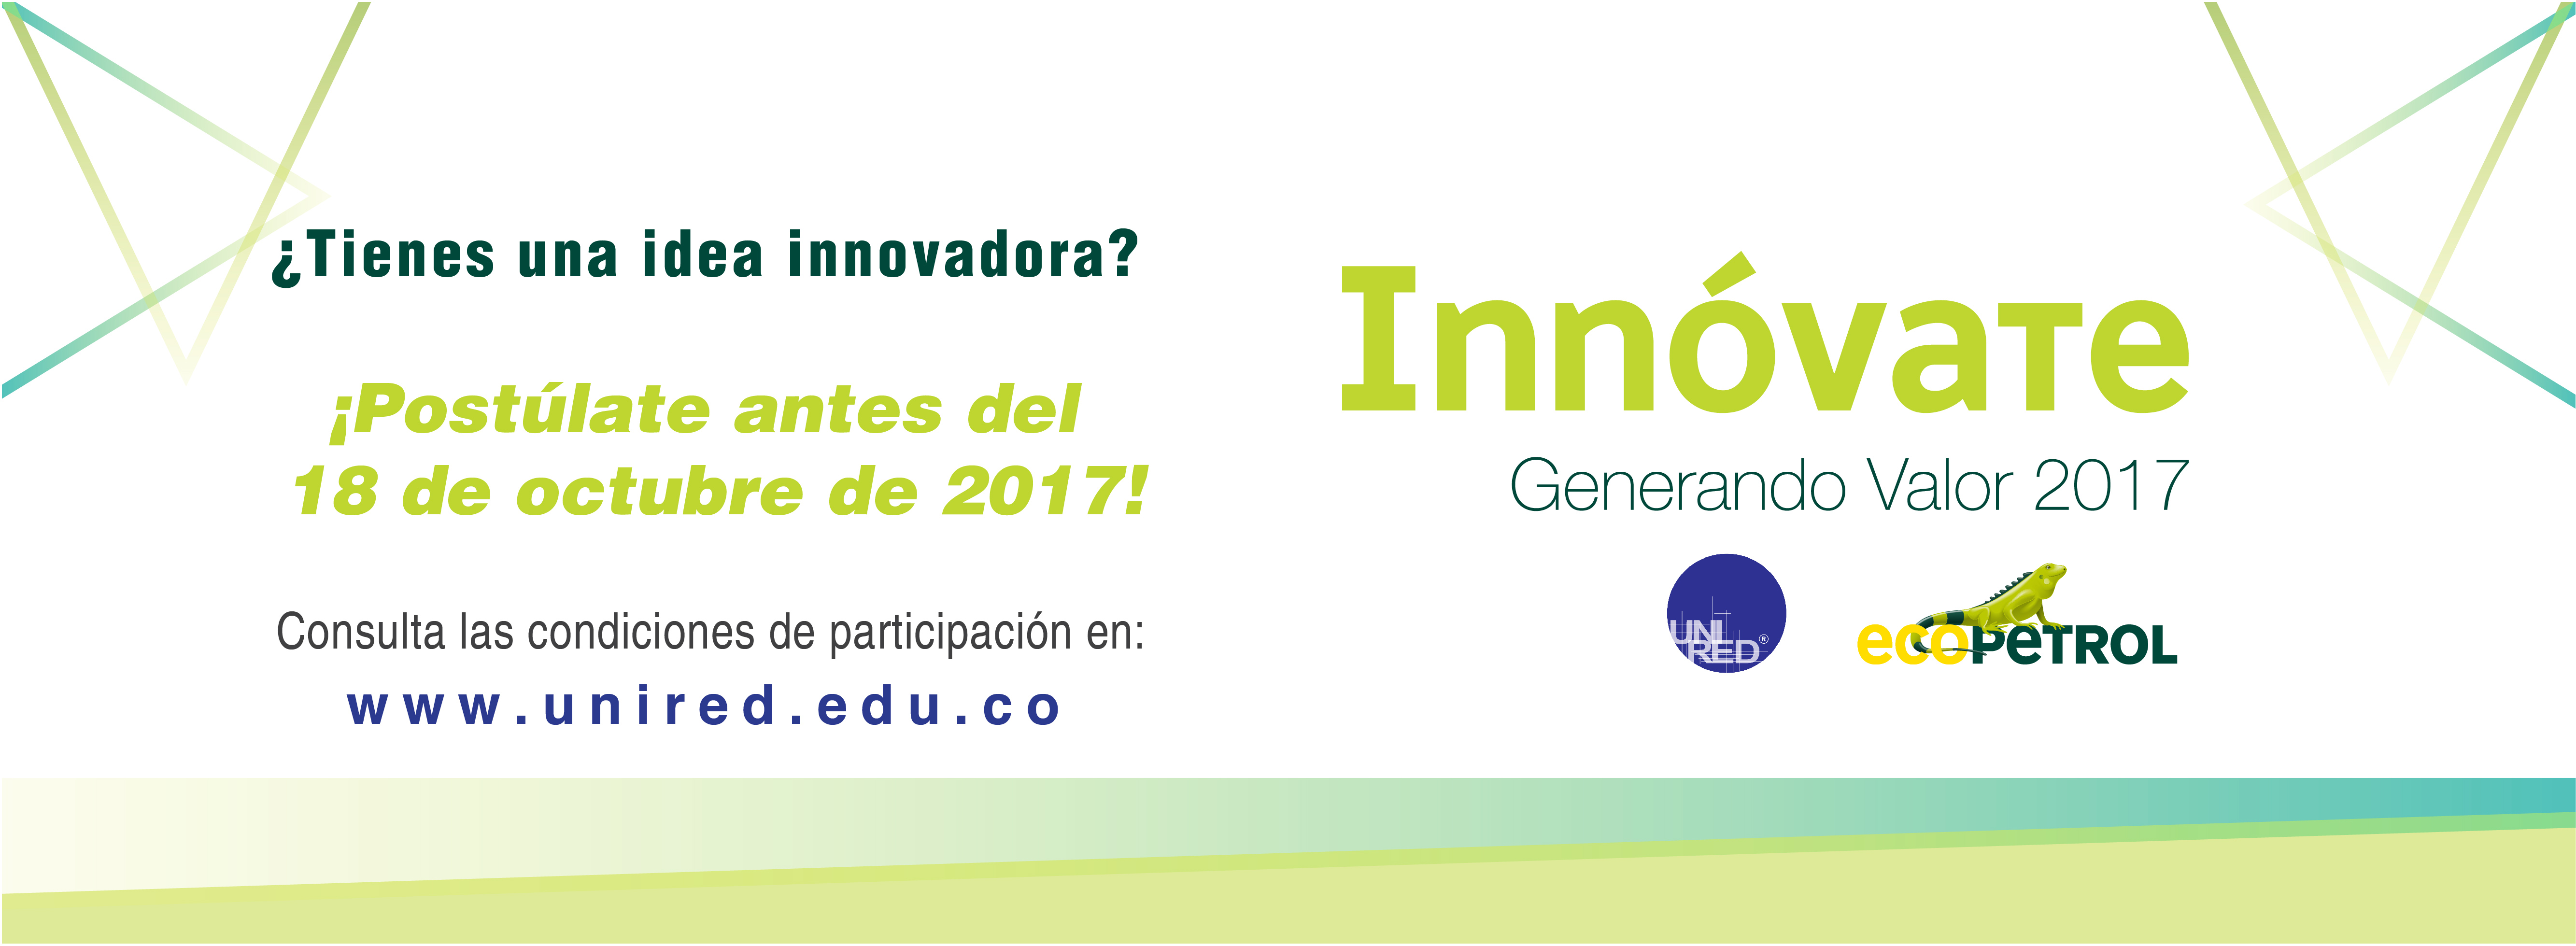 banner innovate extensiontiempo1280x470px 01